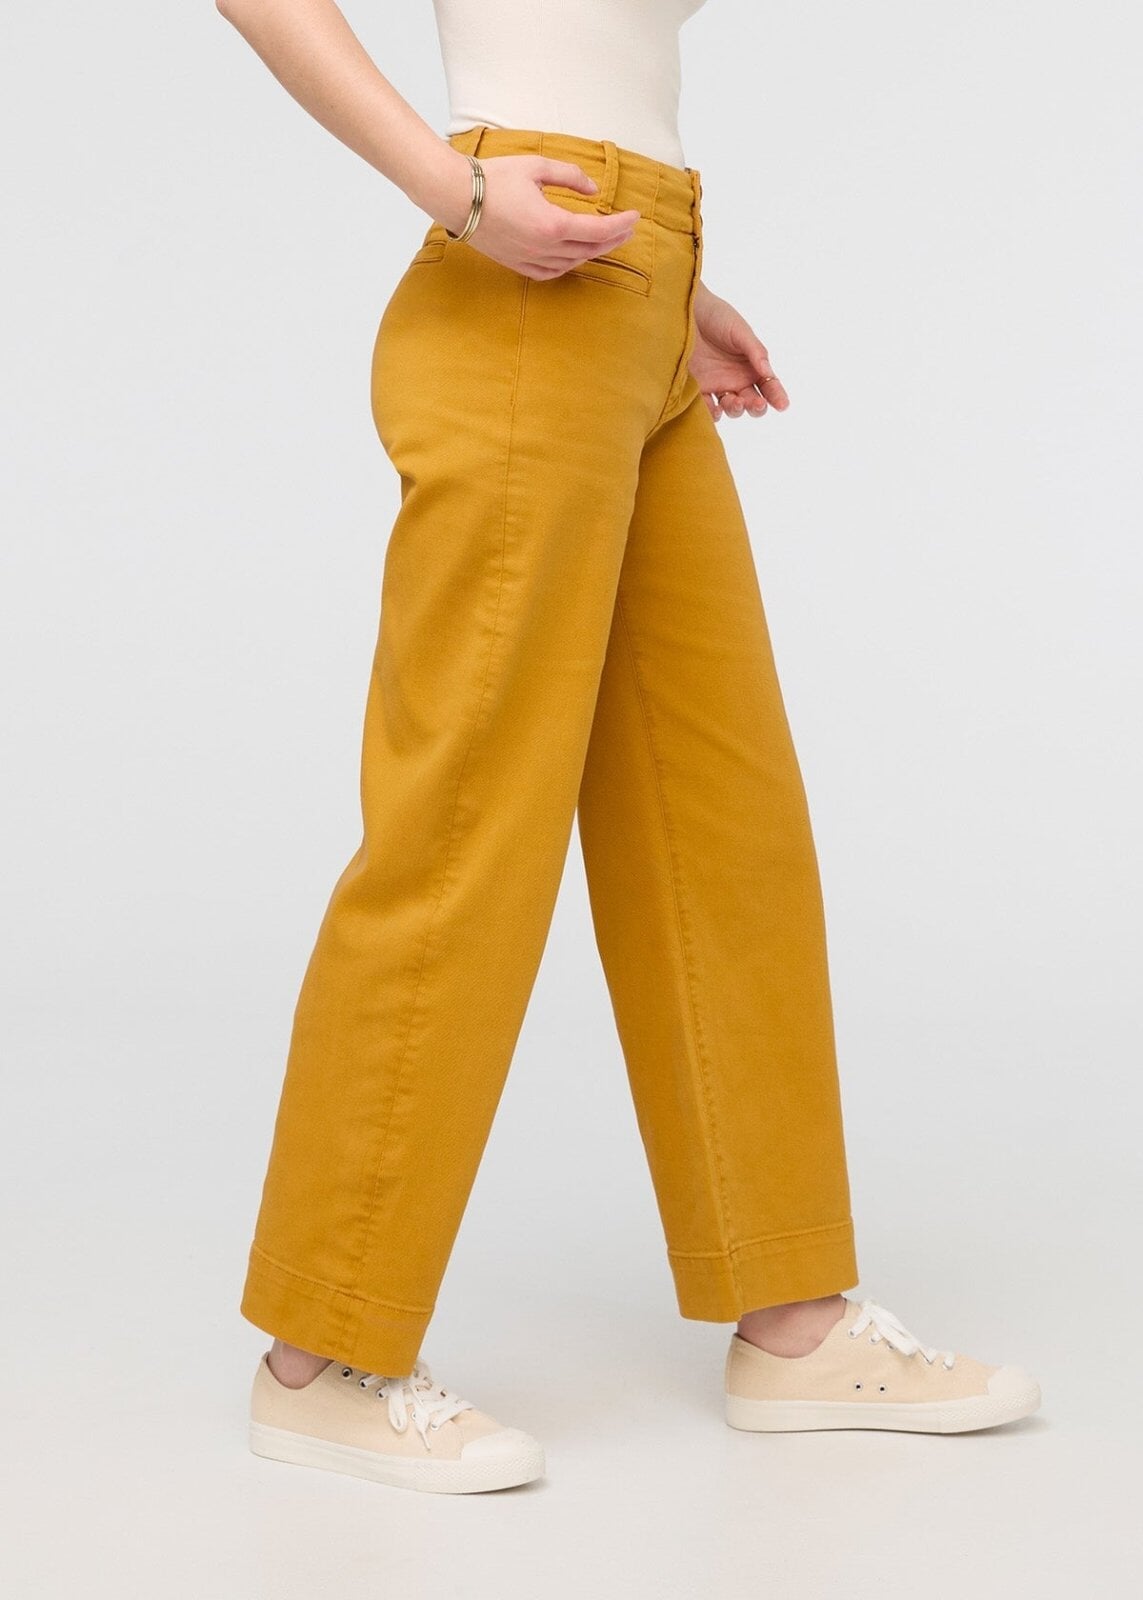 womens yellow high rise trouser side